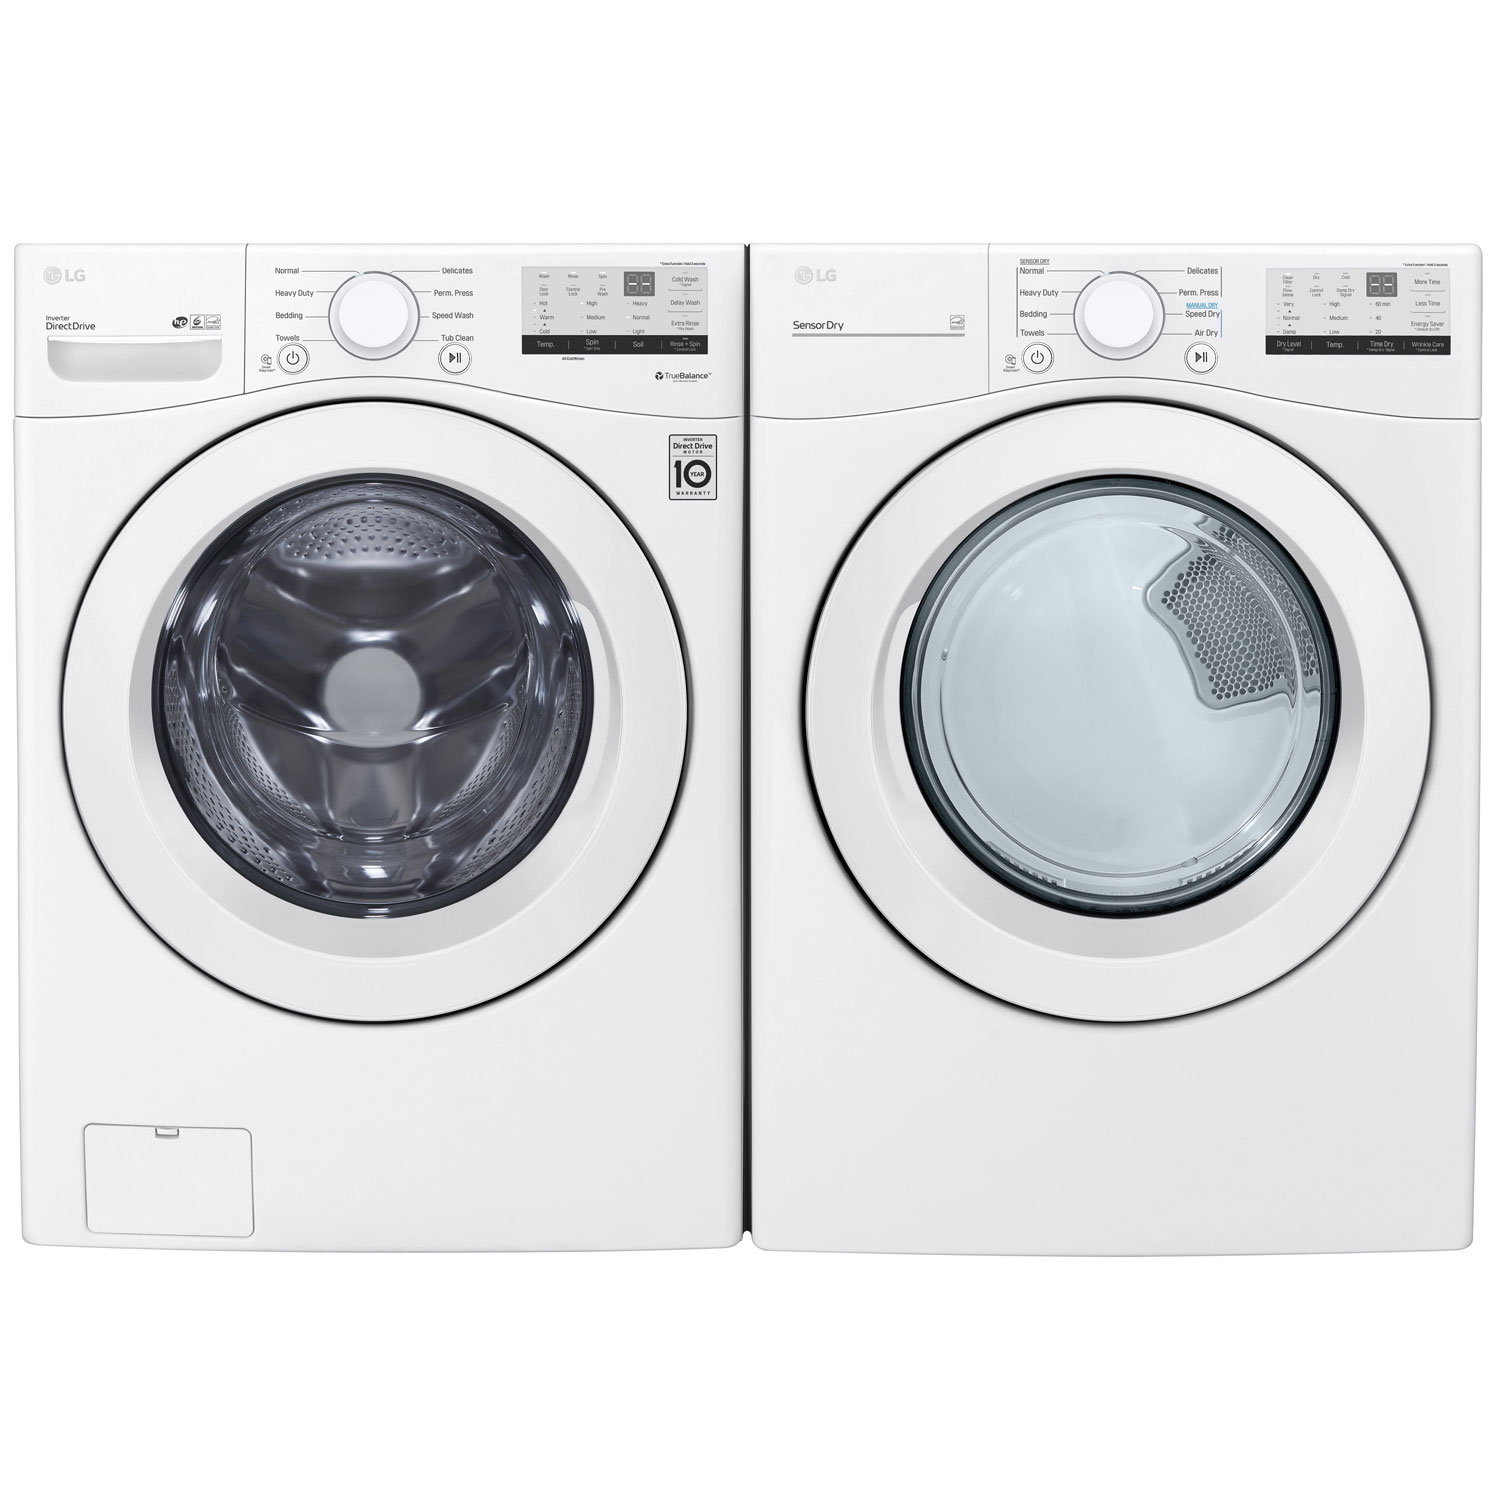 LG 5.2 Cu. Ft. High Efficiency Front Load Washer & 7.4 Cu. Ft. Electric Dryer - White